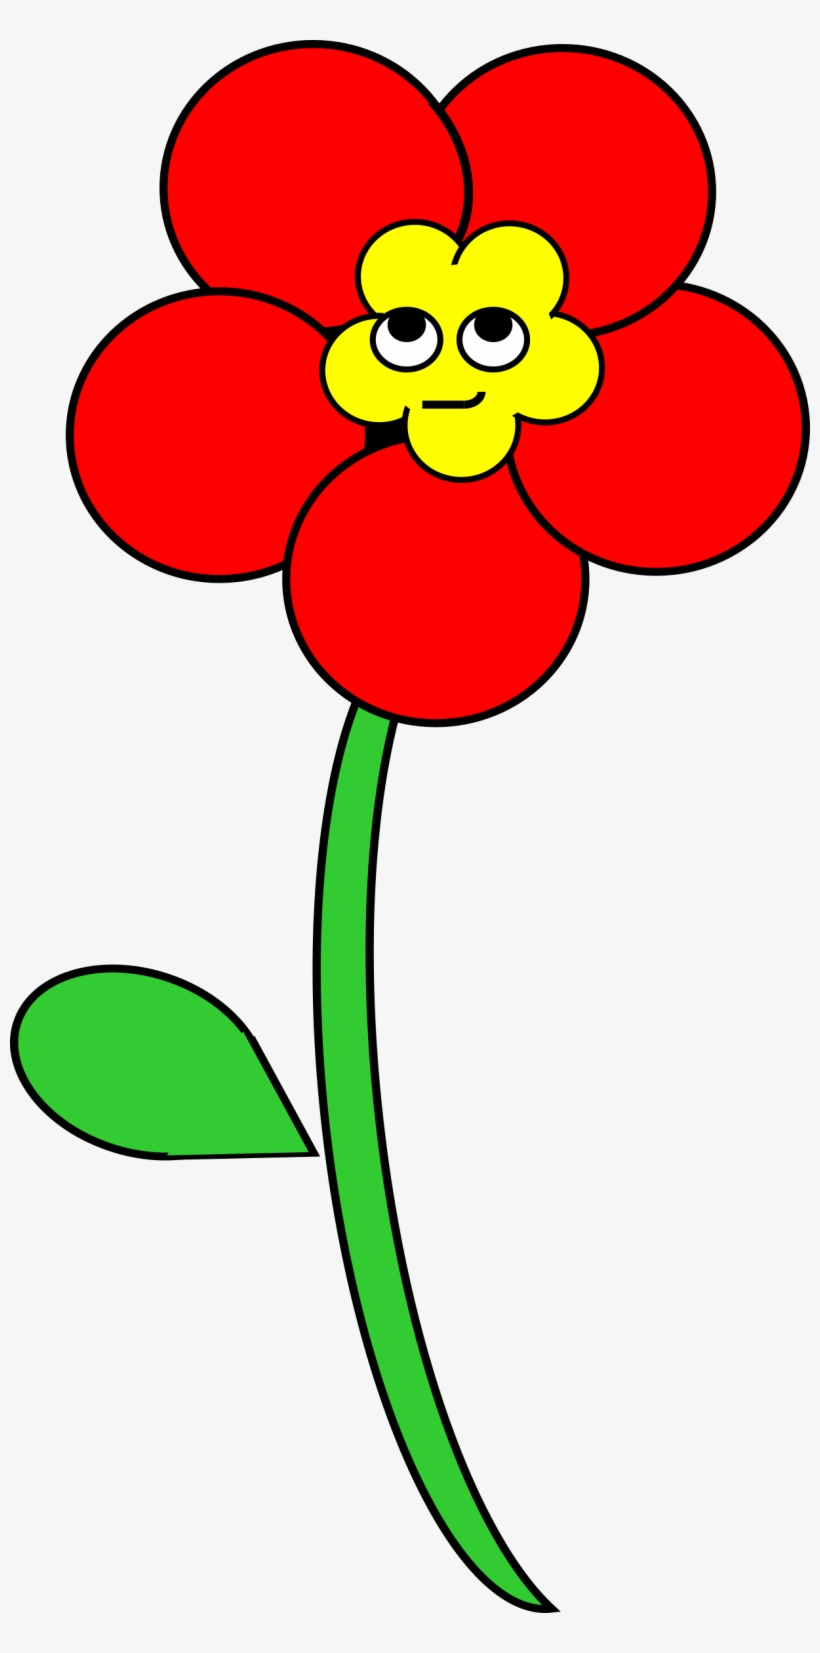 Big Image - Poppy Flower Clipart Black And White, transparent png #1900212